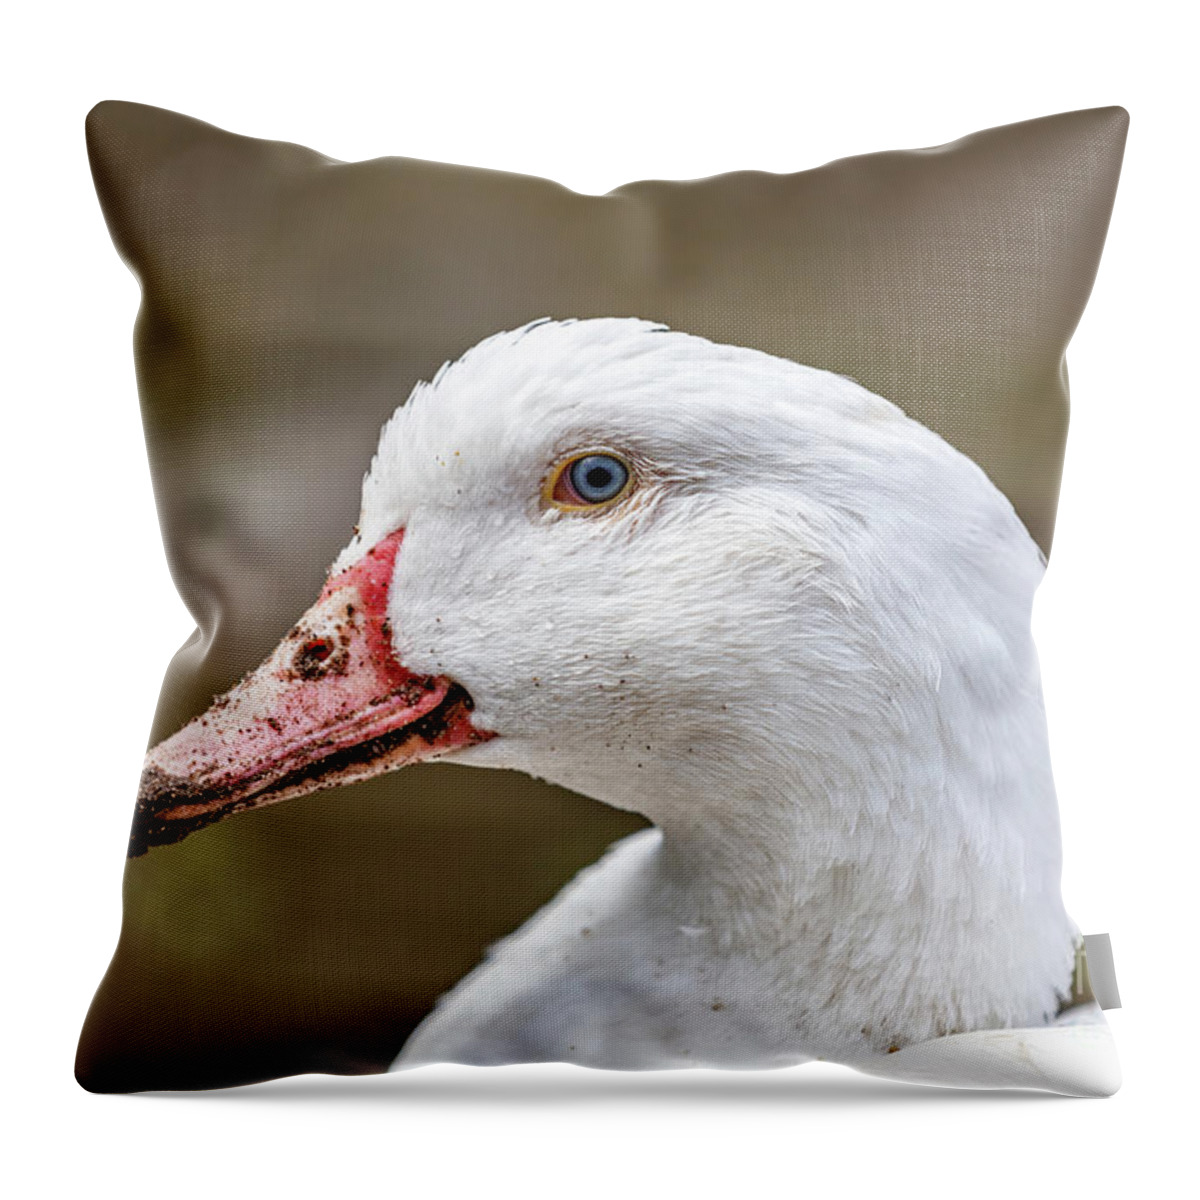 Goose Throw Pillow featuring the photograph White goose close-up face portrait. by Michal Bednarek